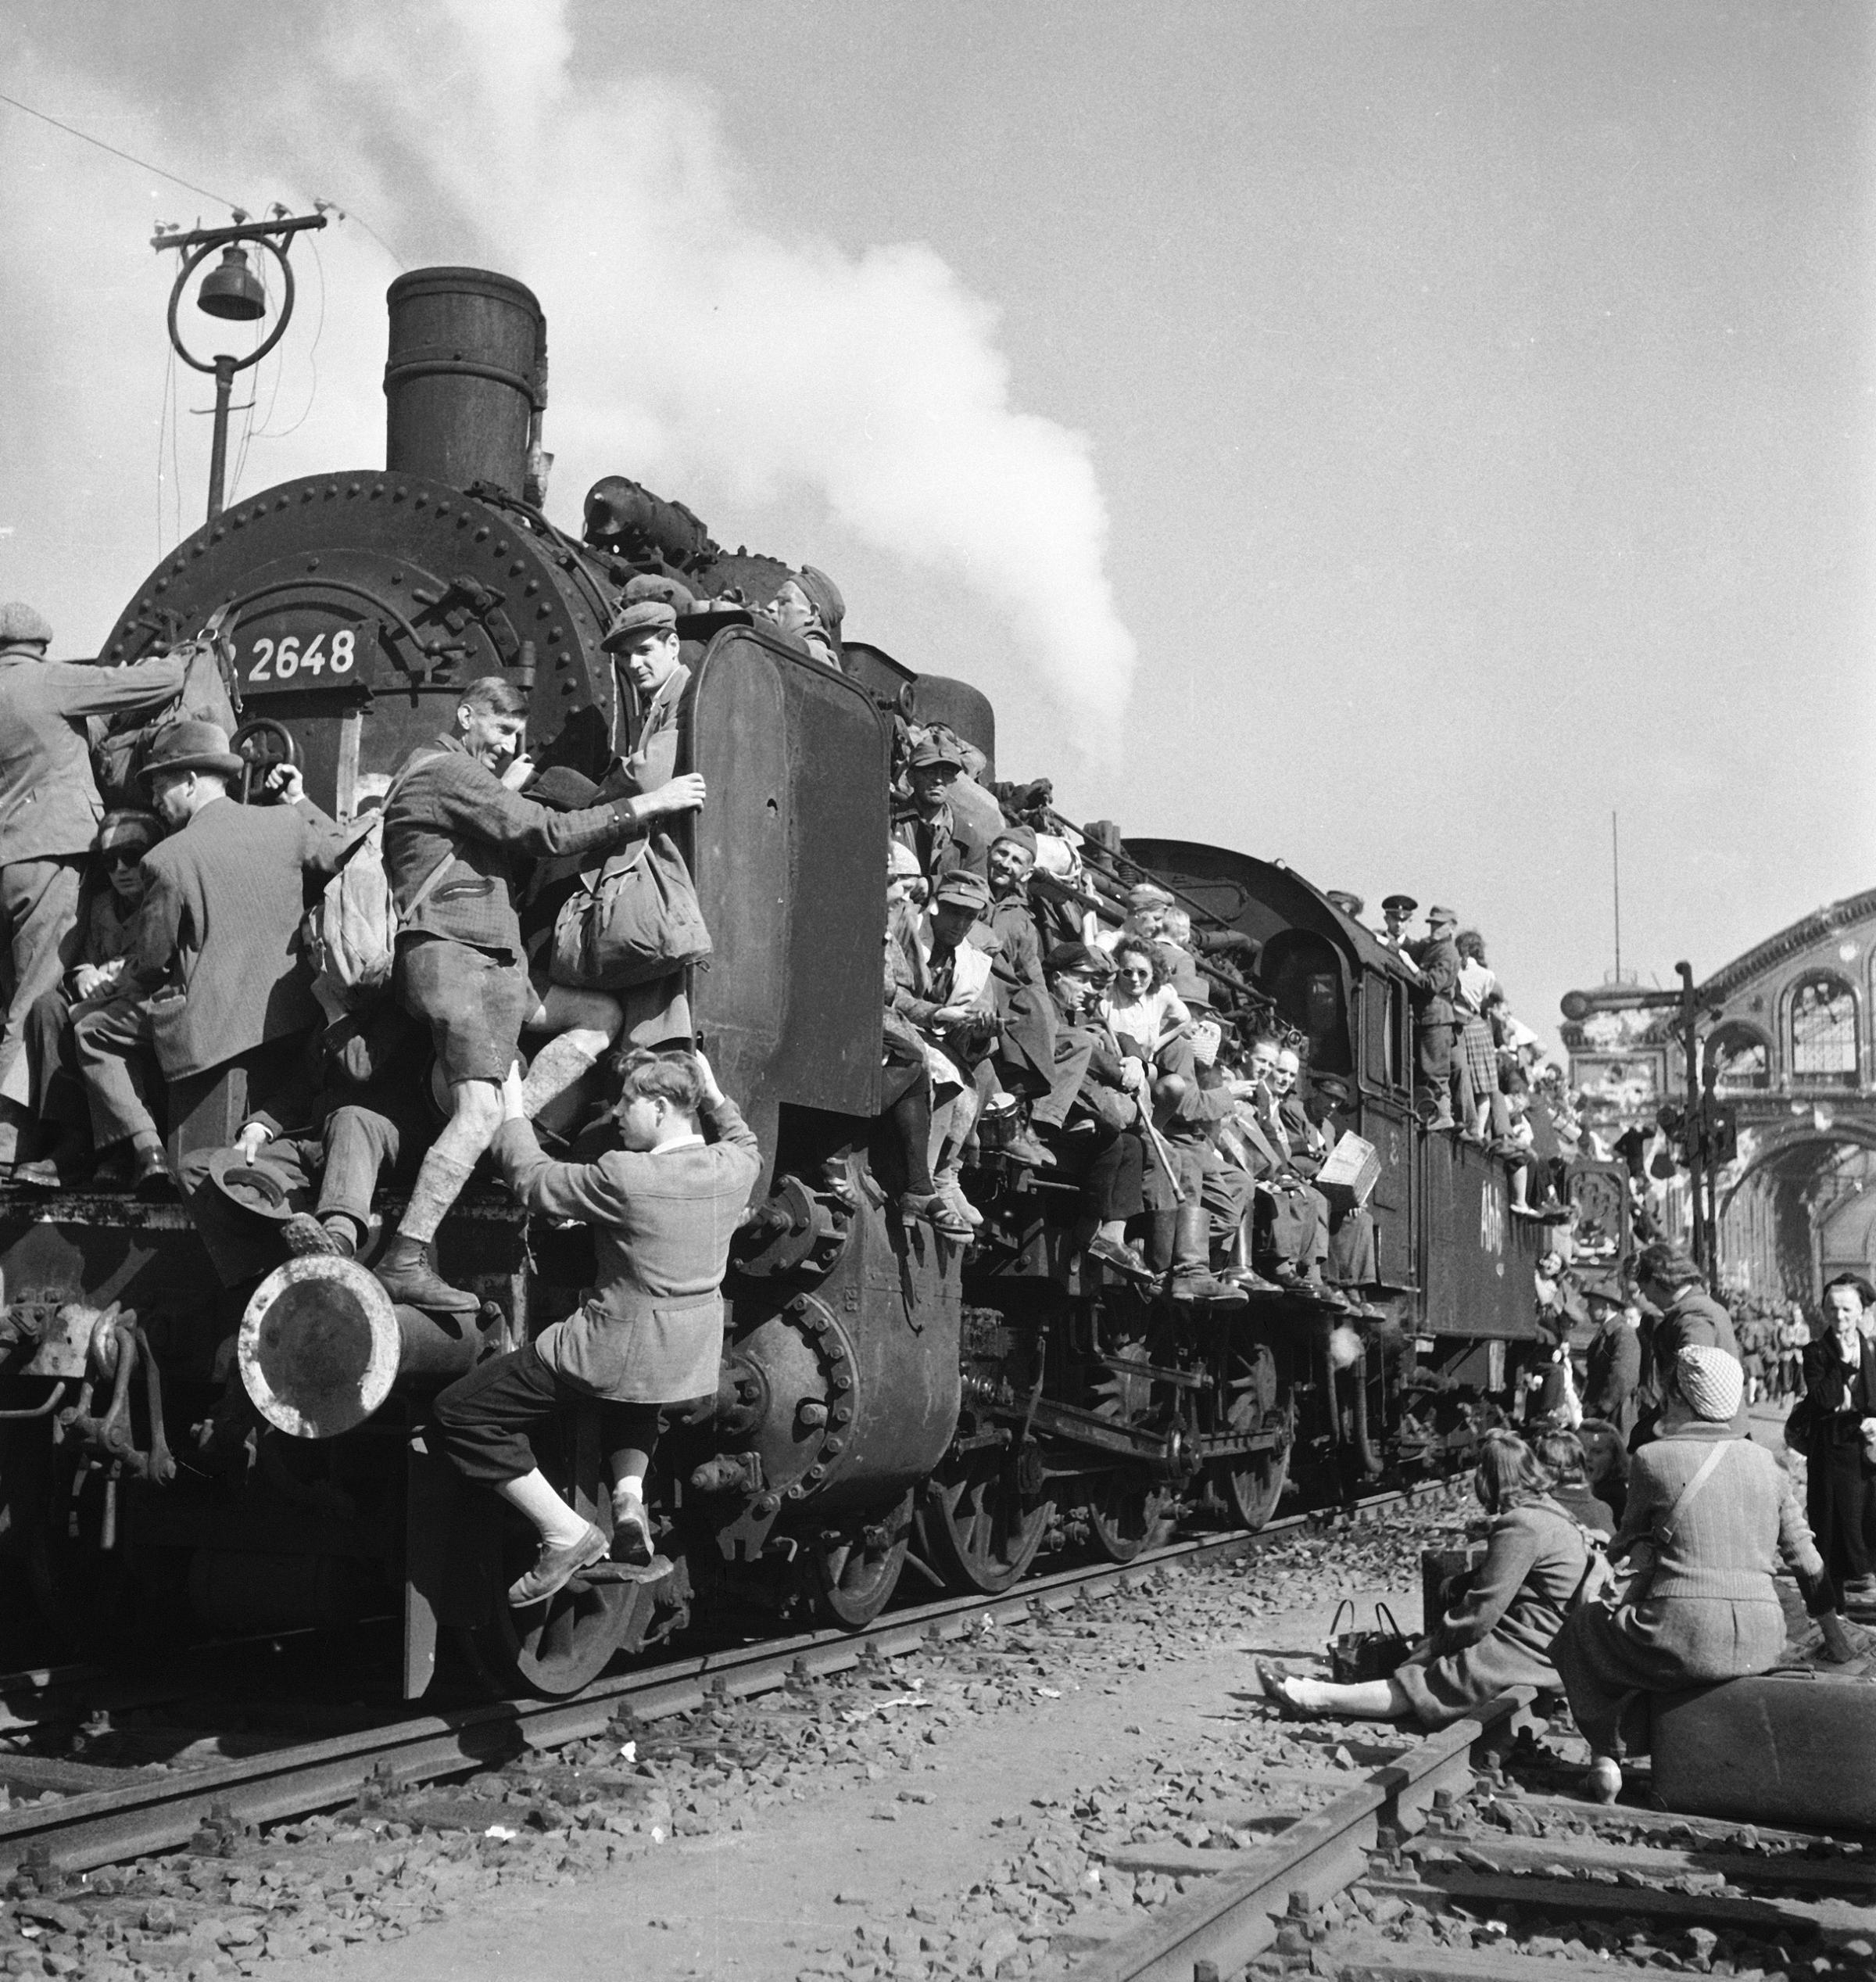 GERMANY - JUNE 06: Post WWII German refugees and displaced persons crowding every square inch of a train leaving Berlin. 1945.